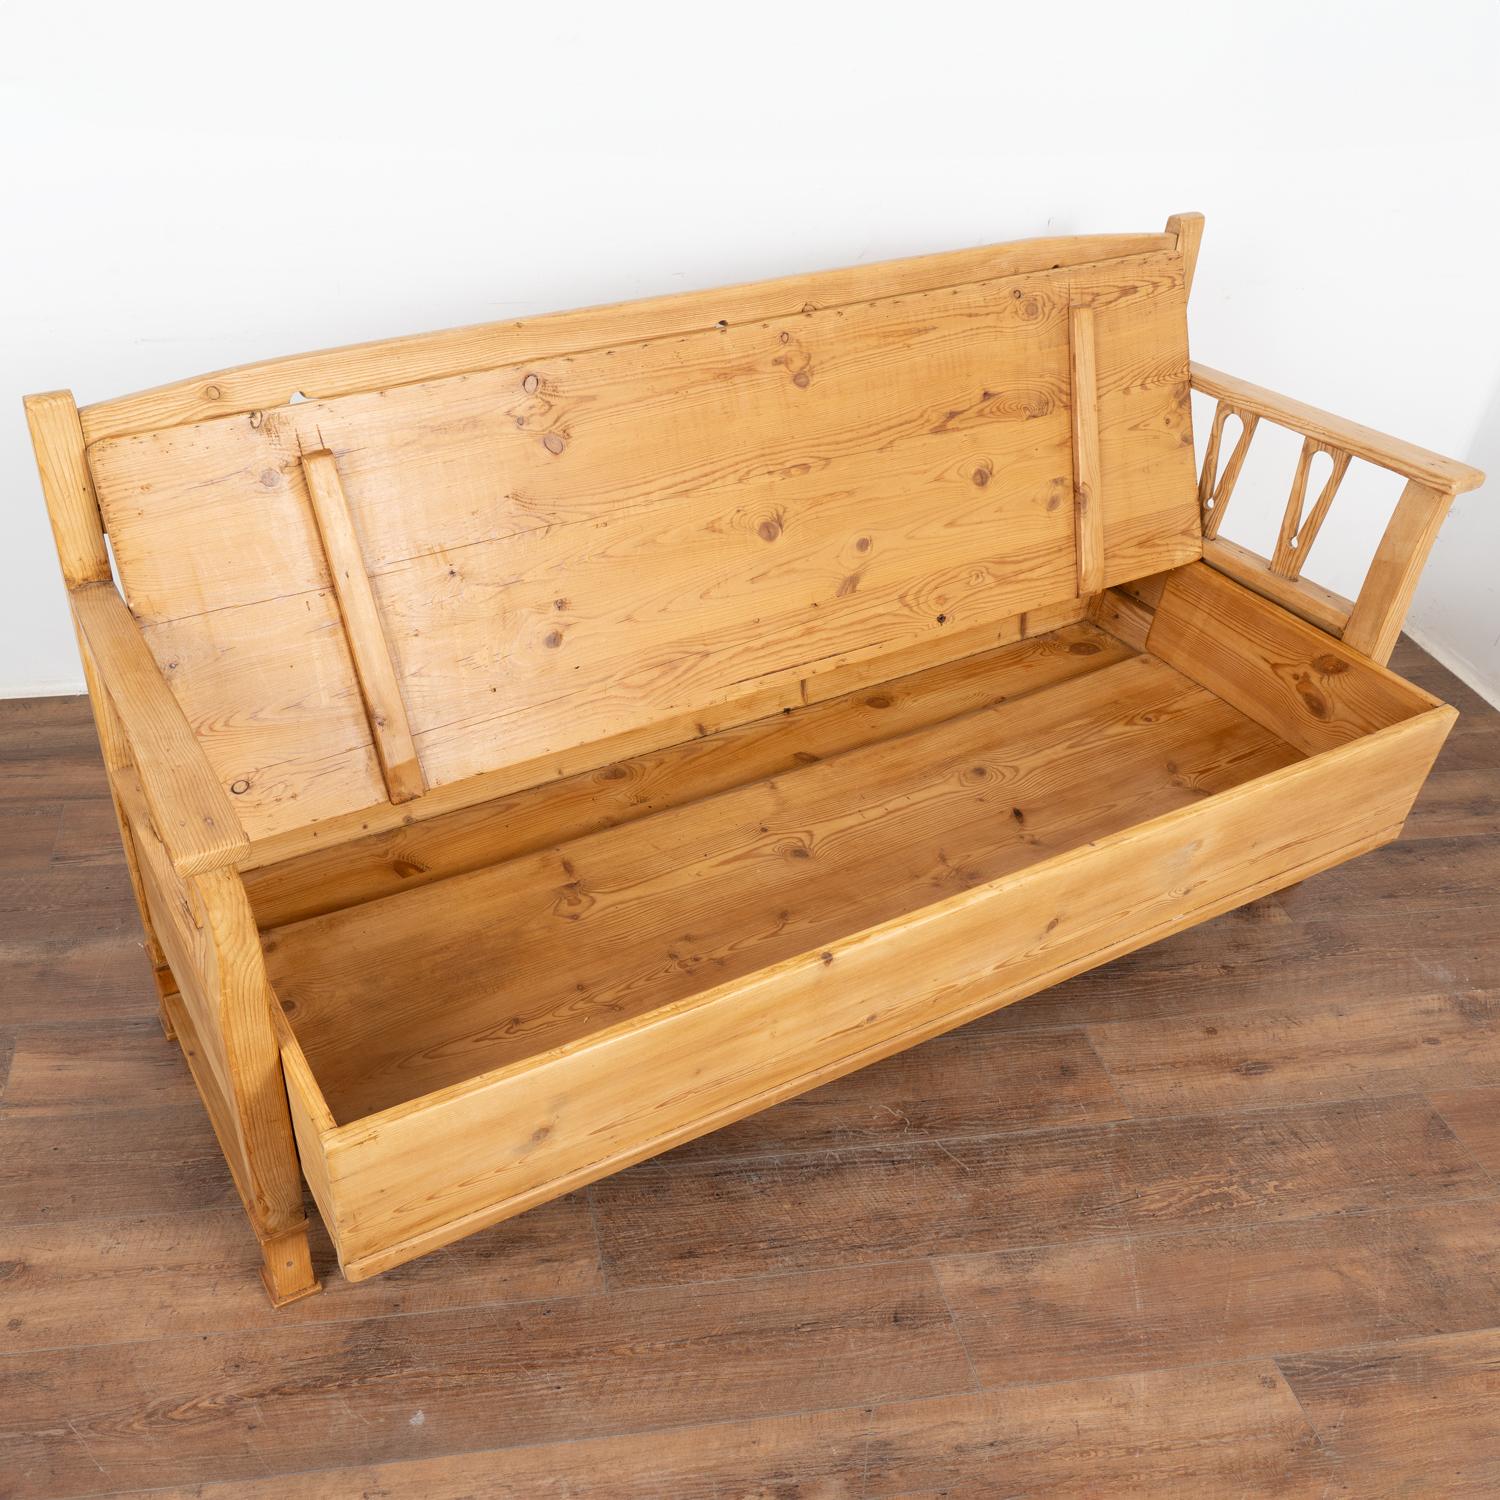 Swedish Pine Bench With Storage, Sweden circa 1880 For Sale